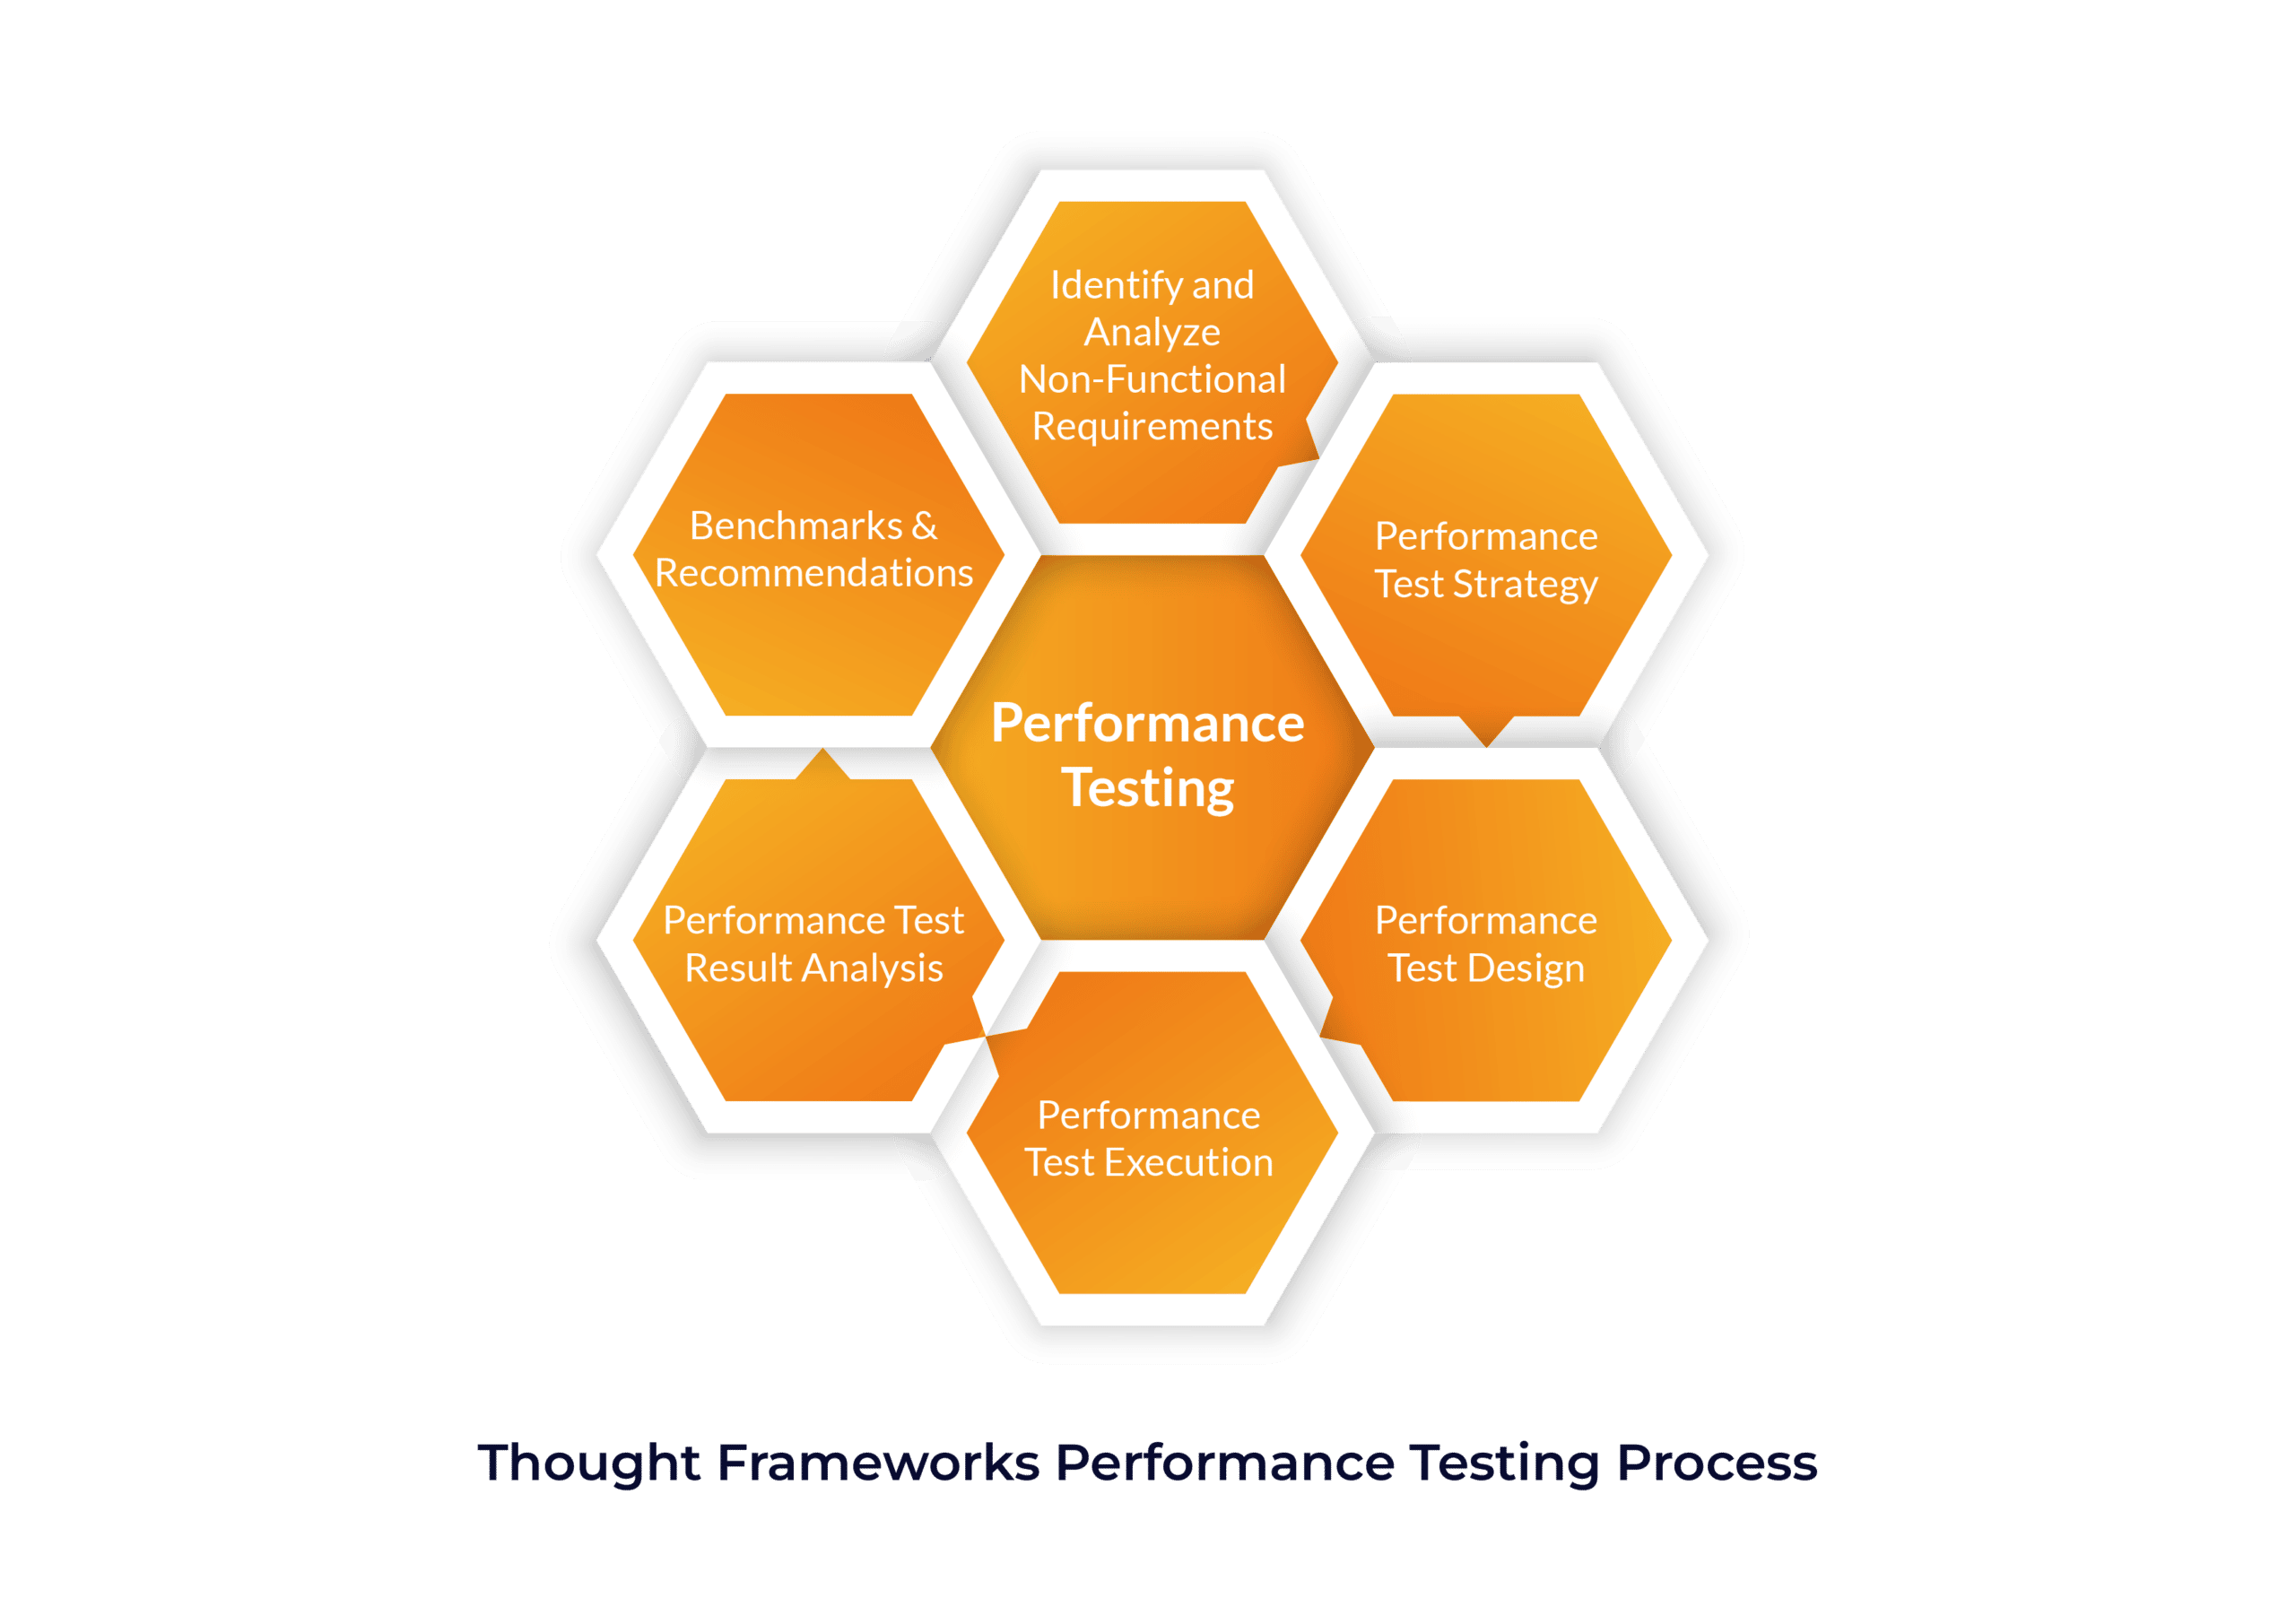  Thought Frameworks Performance Testing Process